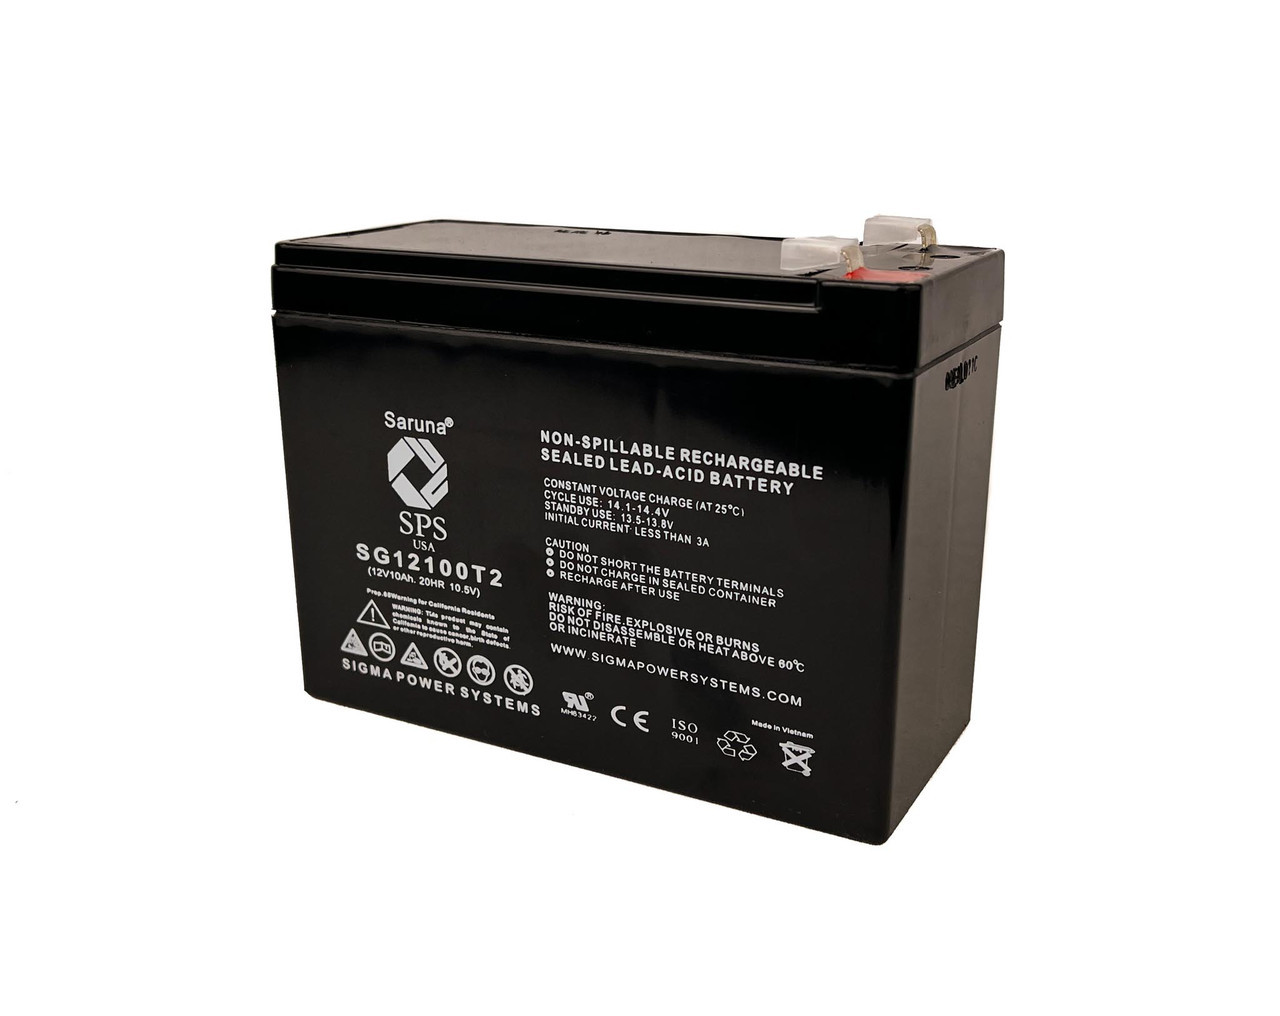 Raion Power 12V 10Ah Non-Spillable Replacement Rechargebale Battery for IZIP I-750 (36 Volt)